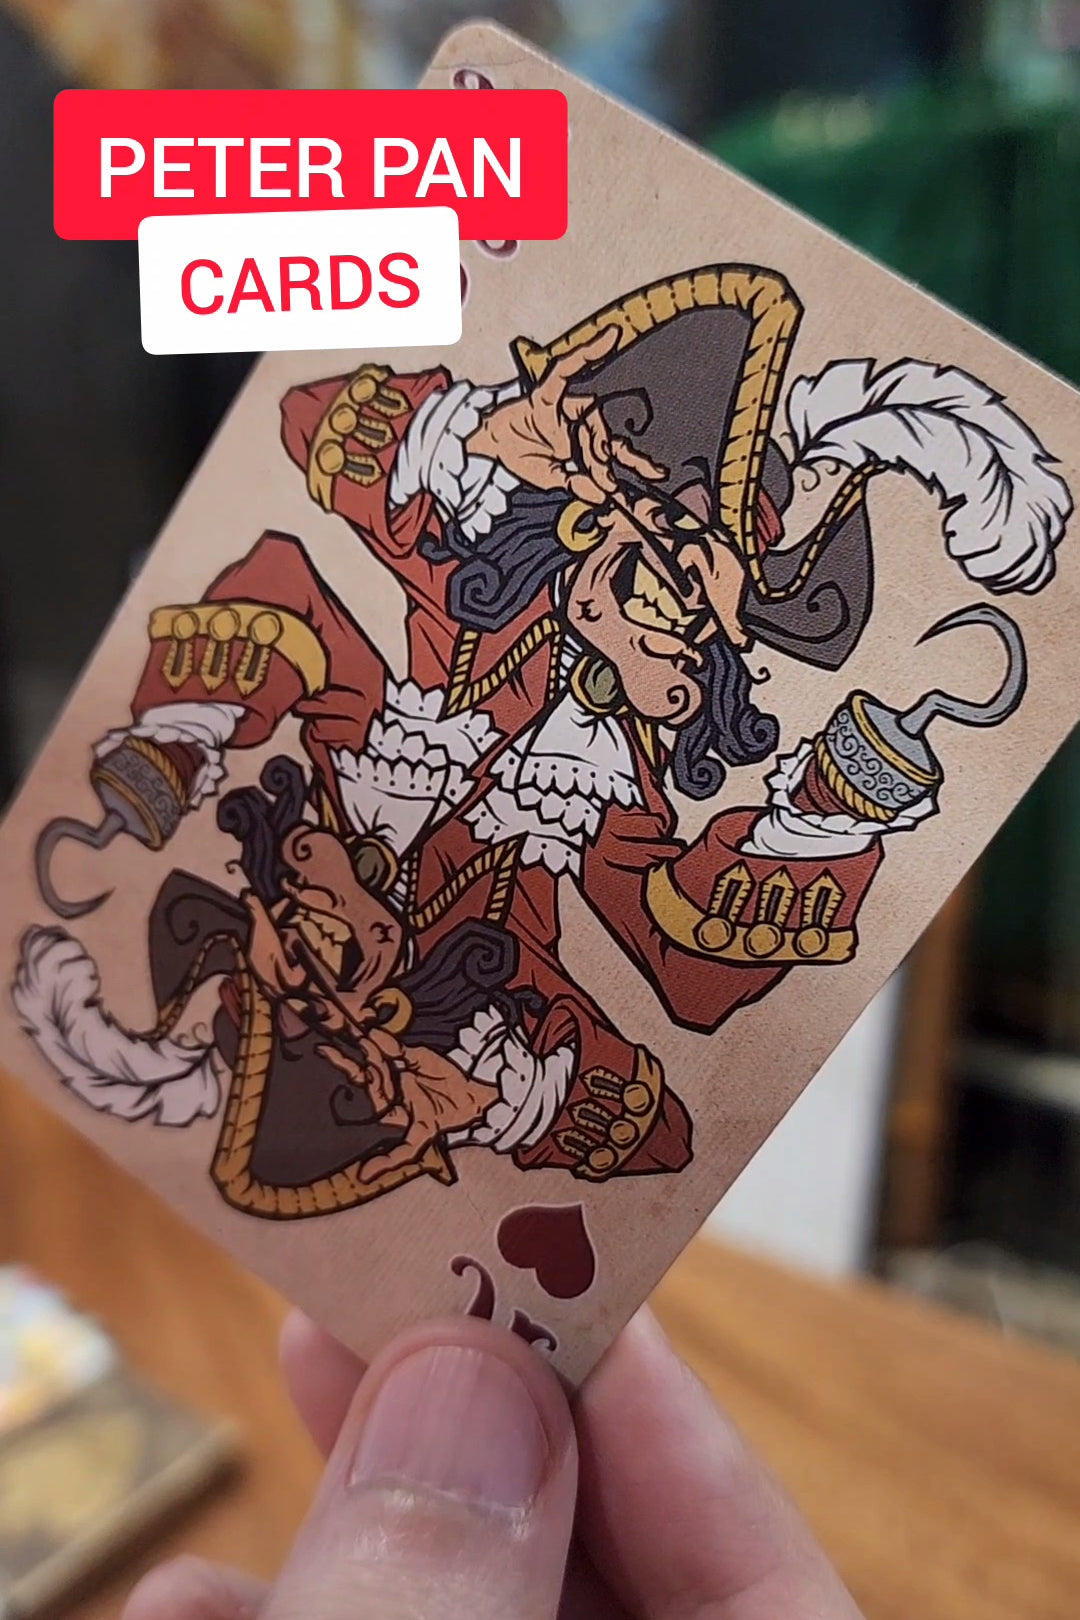 Unboxing Peter Pan Playing Cards